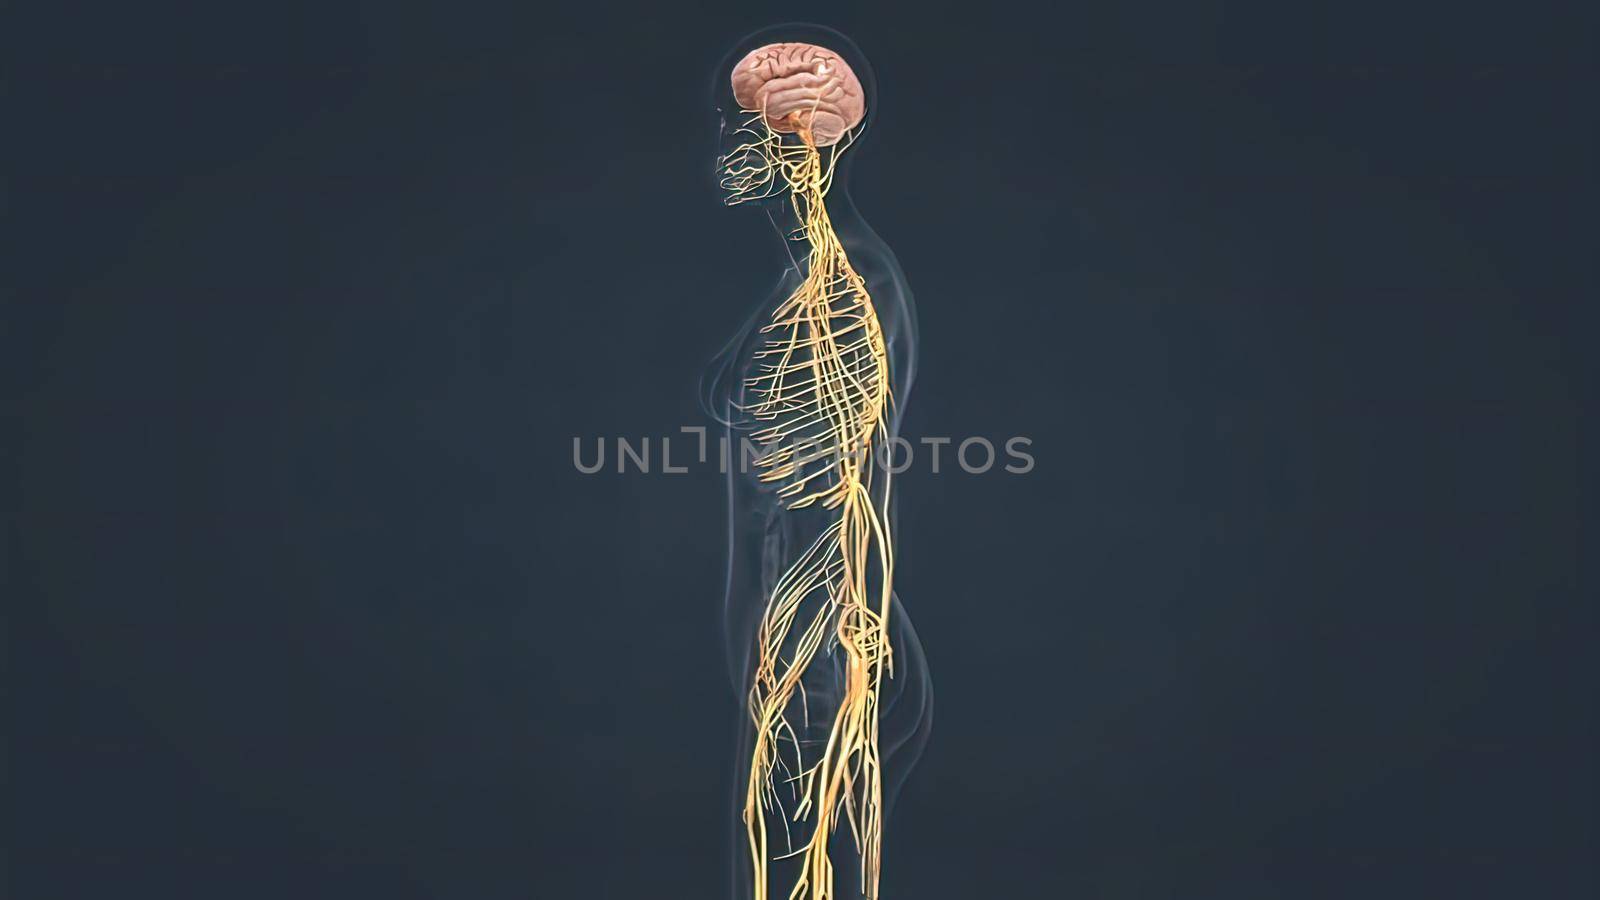 The brain is the most complex part of the human body. It is the center of consciousness and also controls all voluntary and involuntary movement and bodily functions. 3D illustration